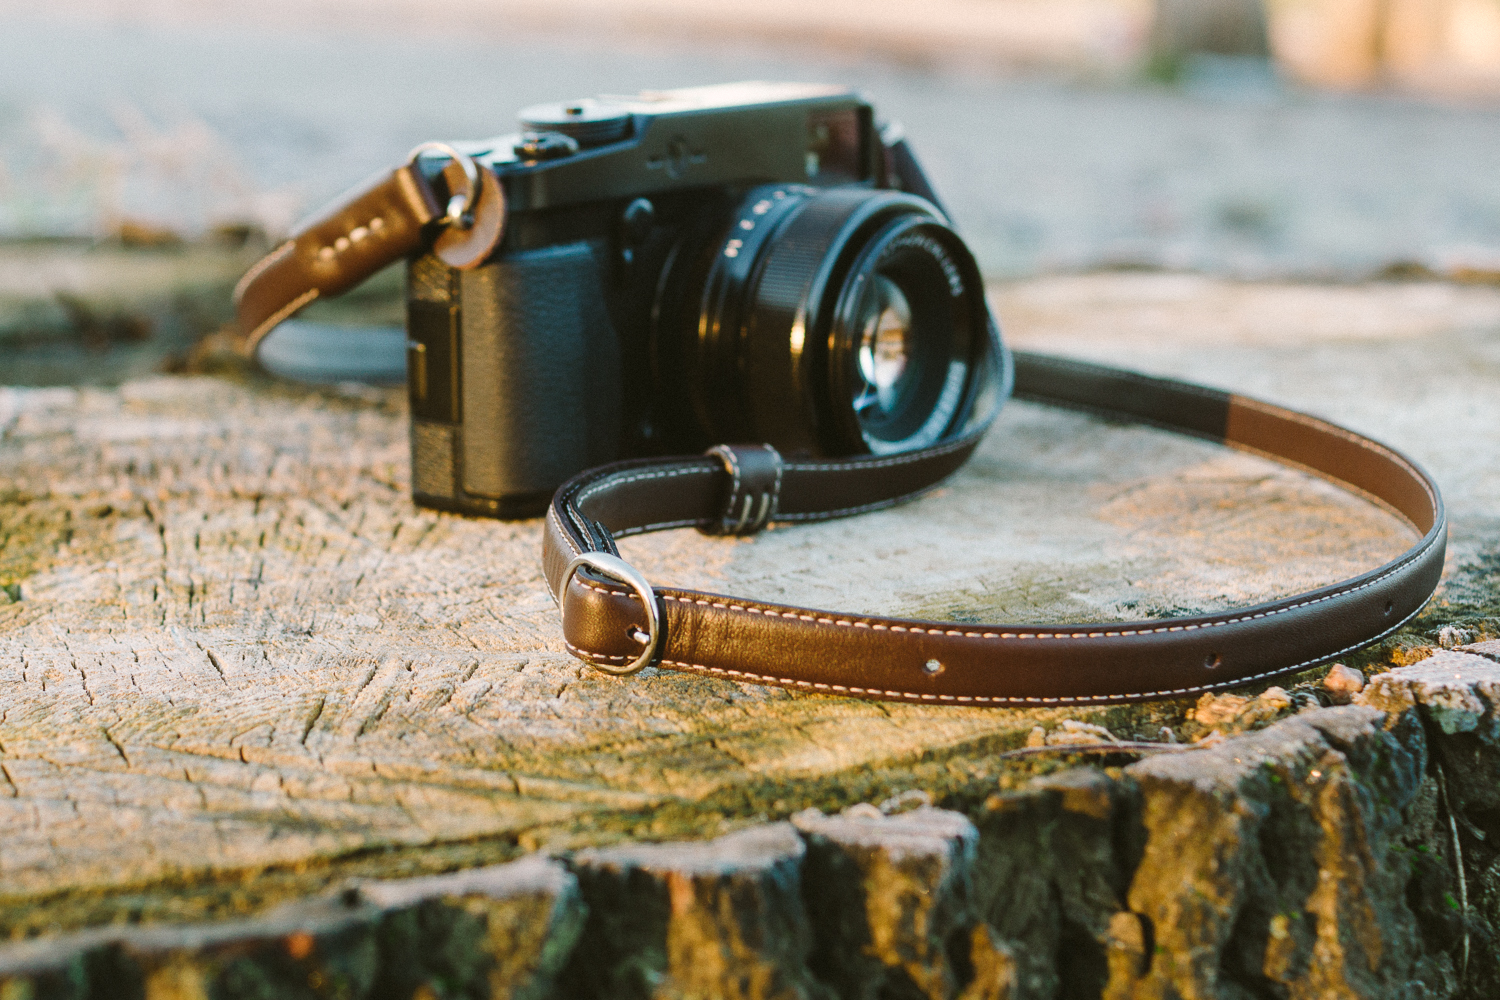 Nucis Leather “Classic Brown” camera strap review